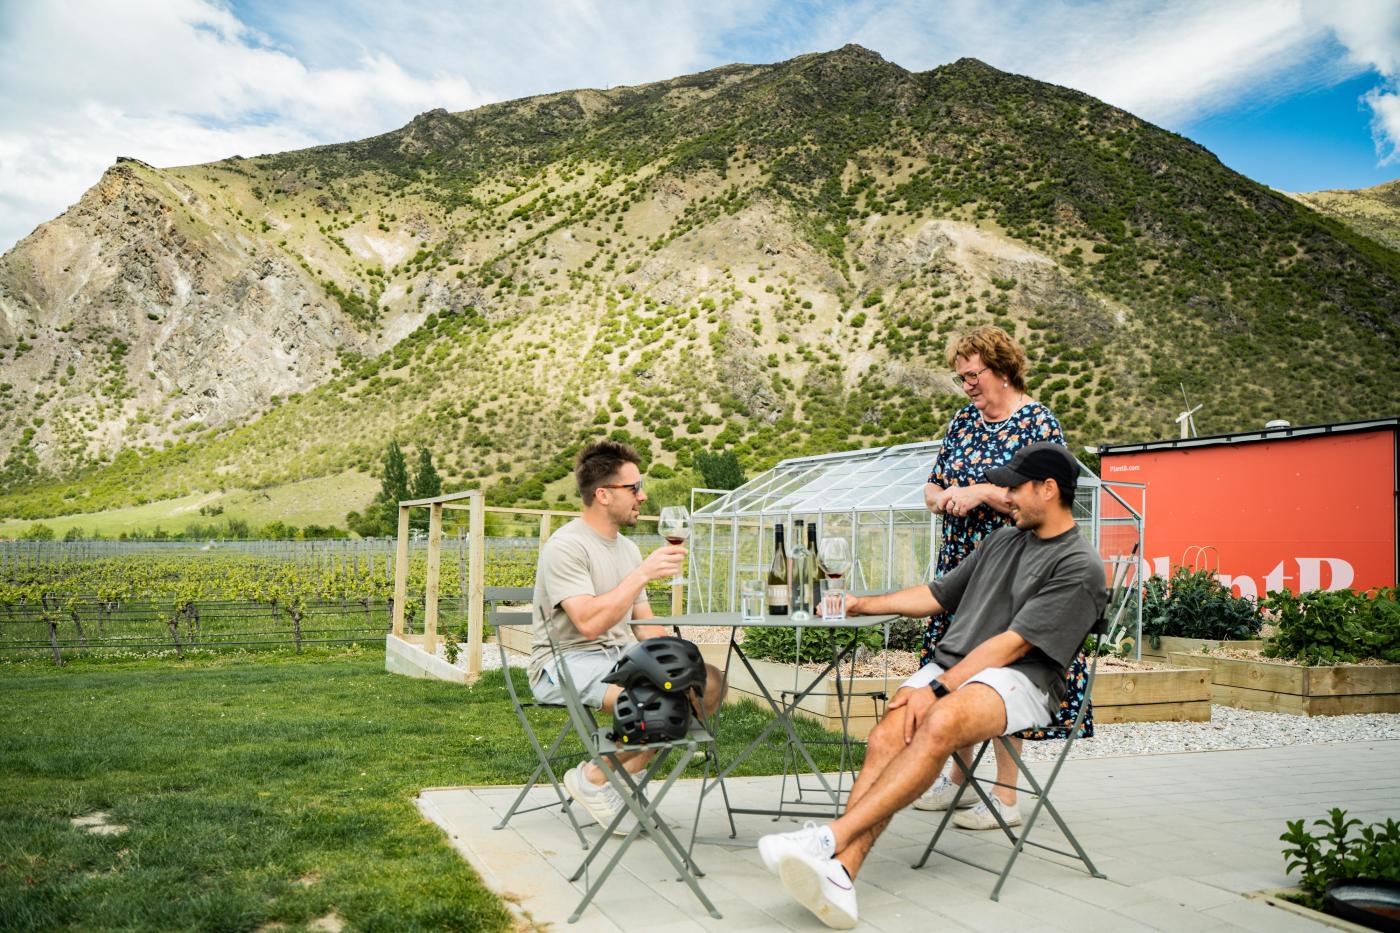 People enjoying a wine at ta table with mountains in the background